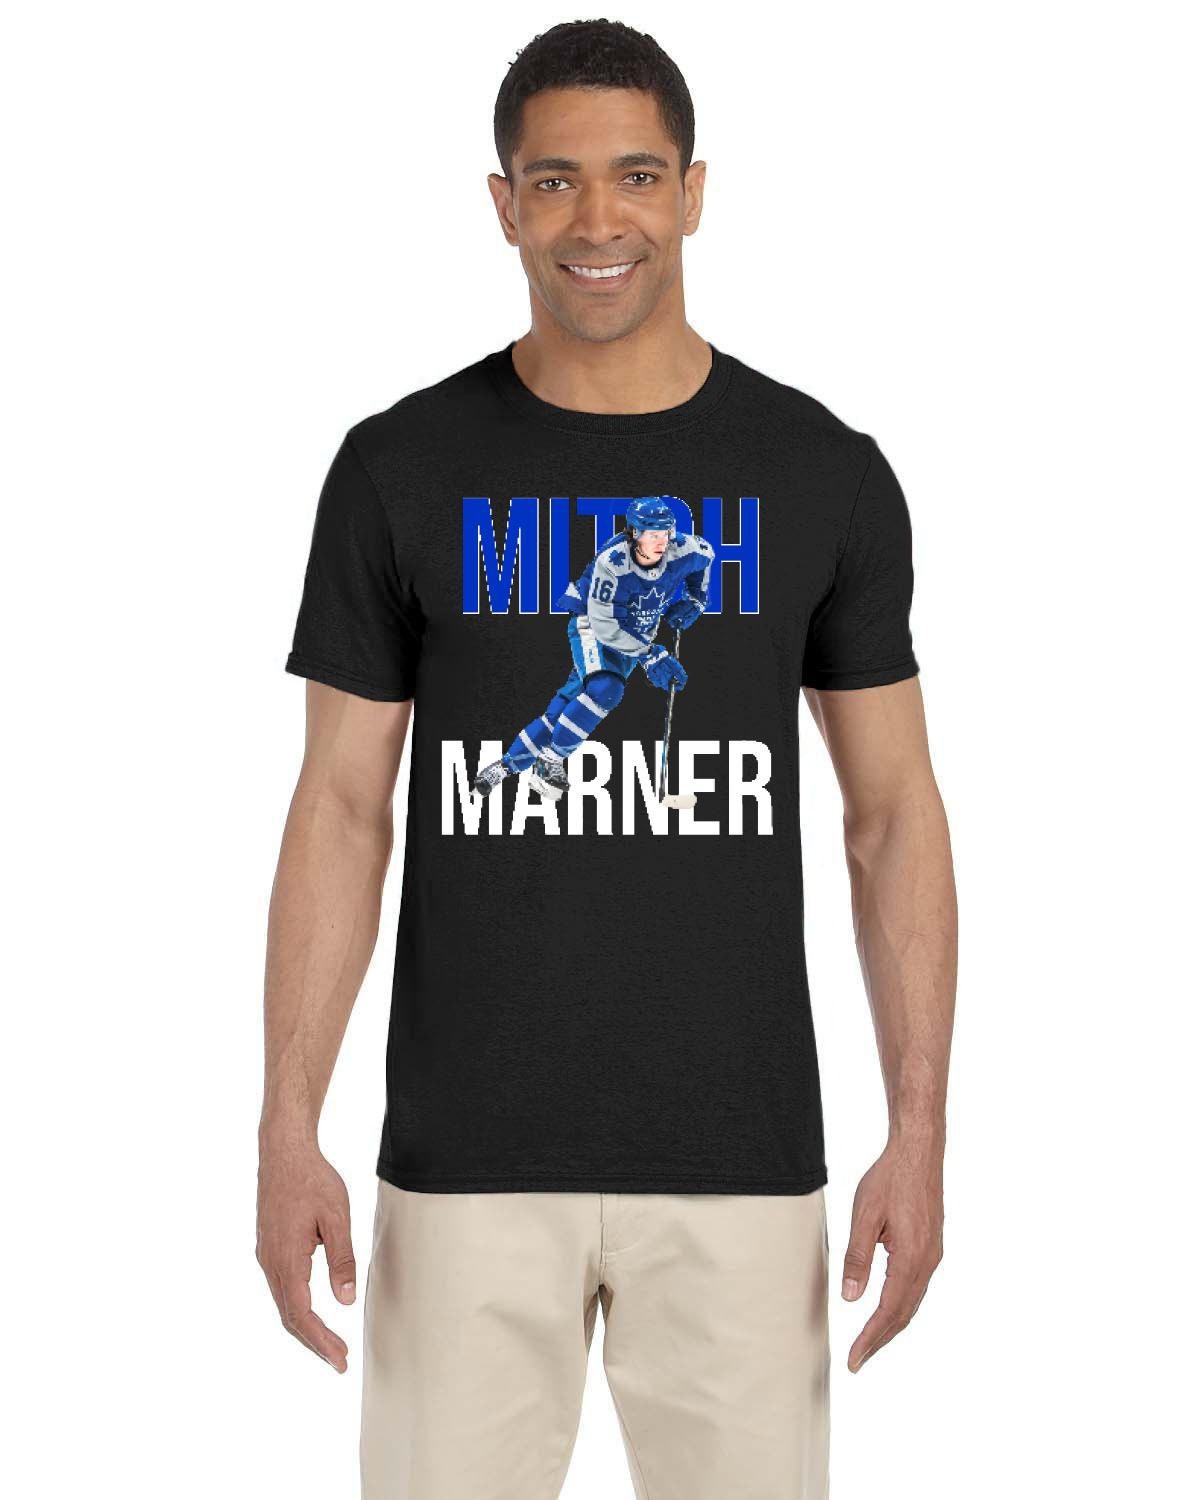 Discover Mitch Marner Unisex Adult Softstyle T-Shirt